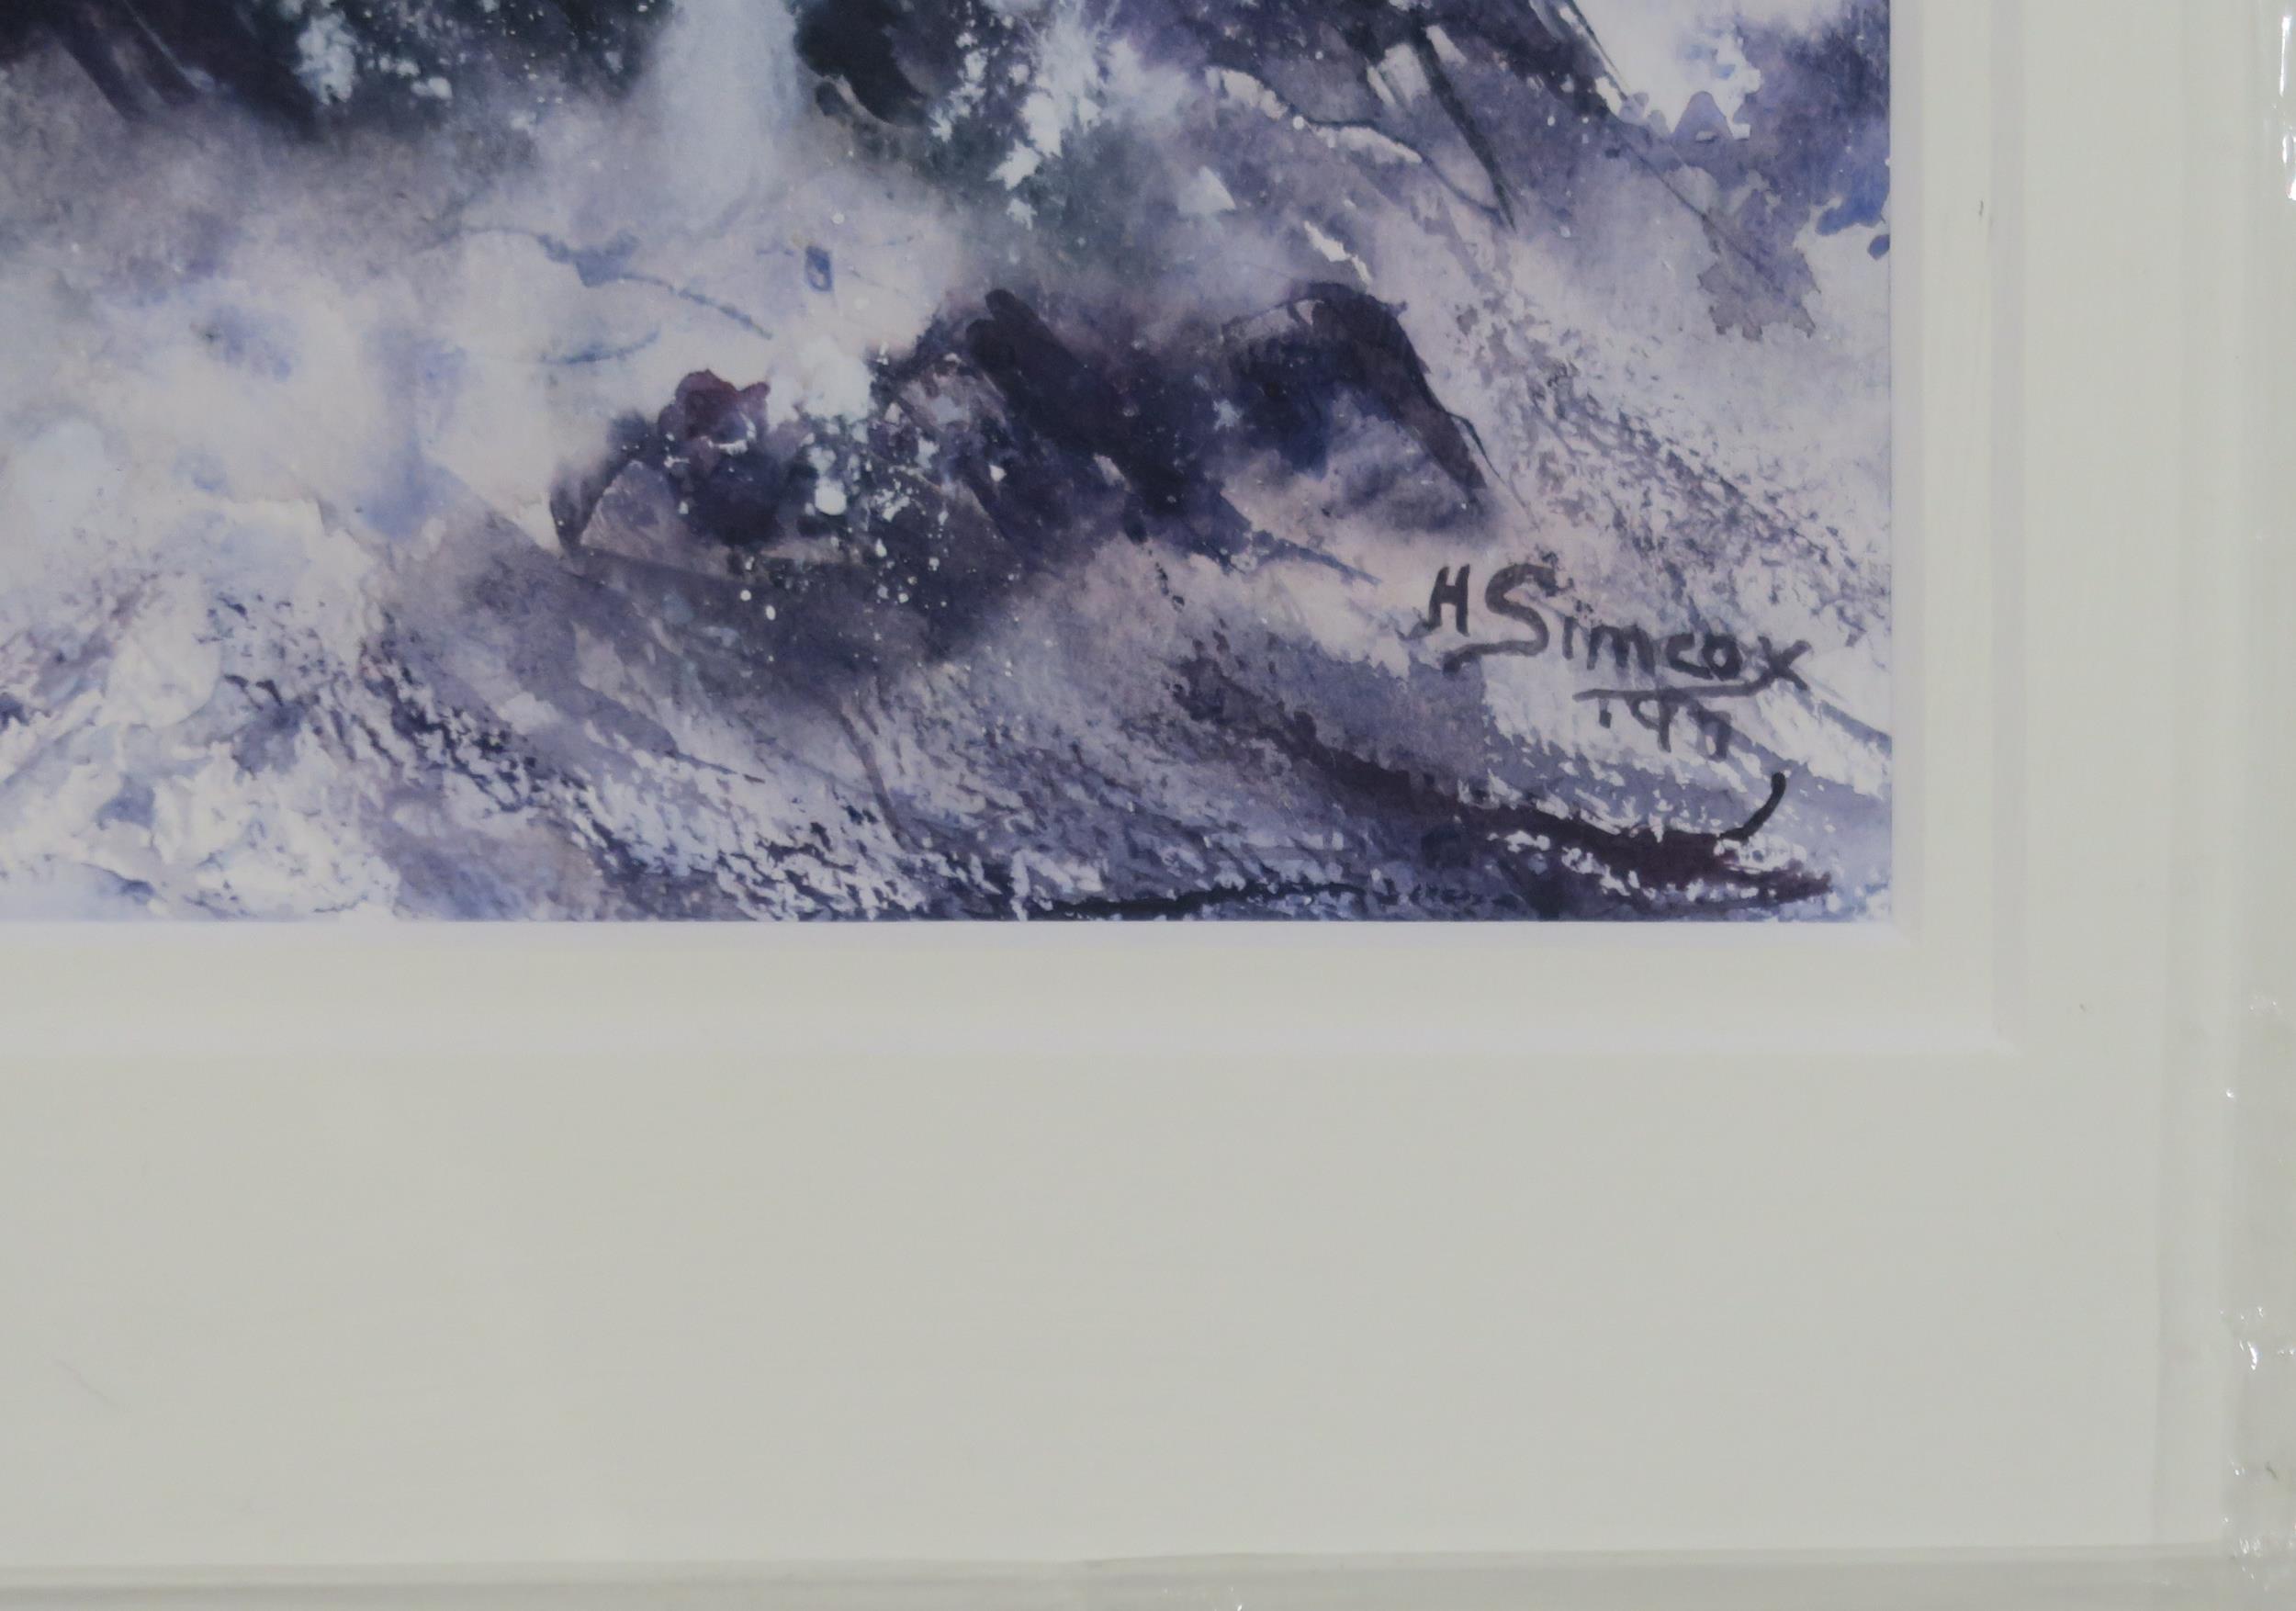 HELEN SIMCOX (SCOTTISH CONTEMPORARY) Watercolour and mixed media, signed lower right, dated, 25 x - Image 3 of 3